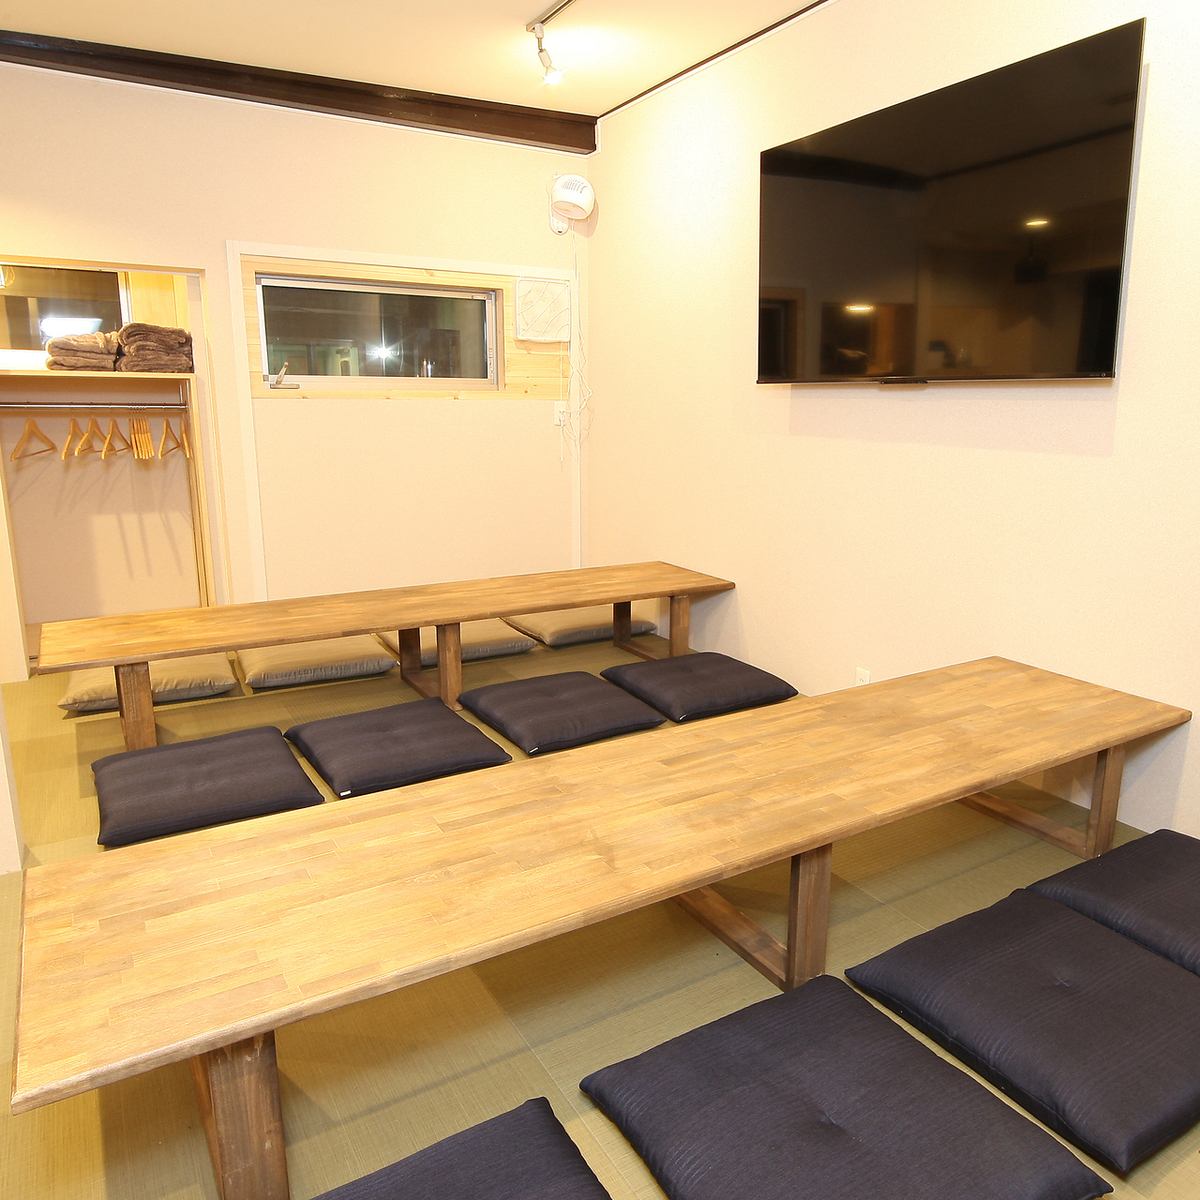 Private rentals are also available upon consultation! Convenient for gatherings near the station!